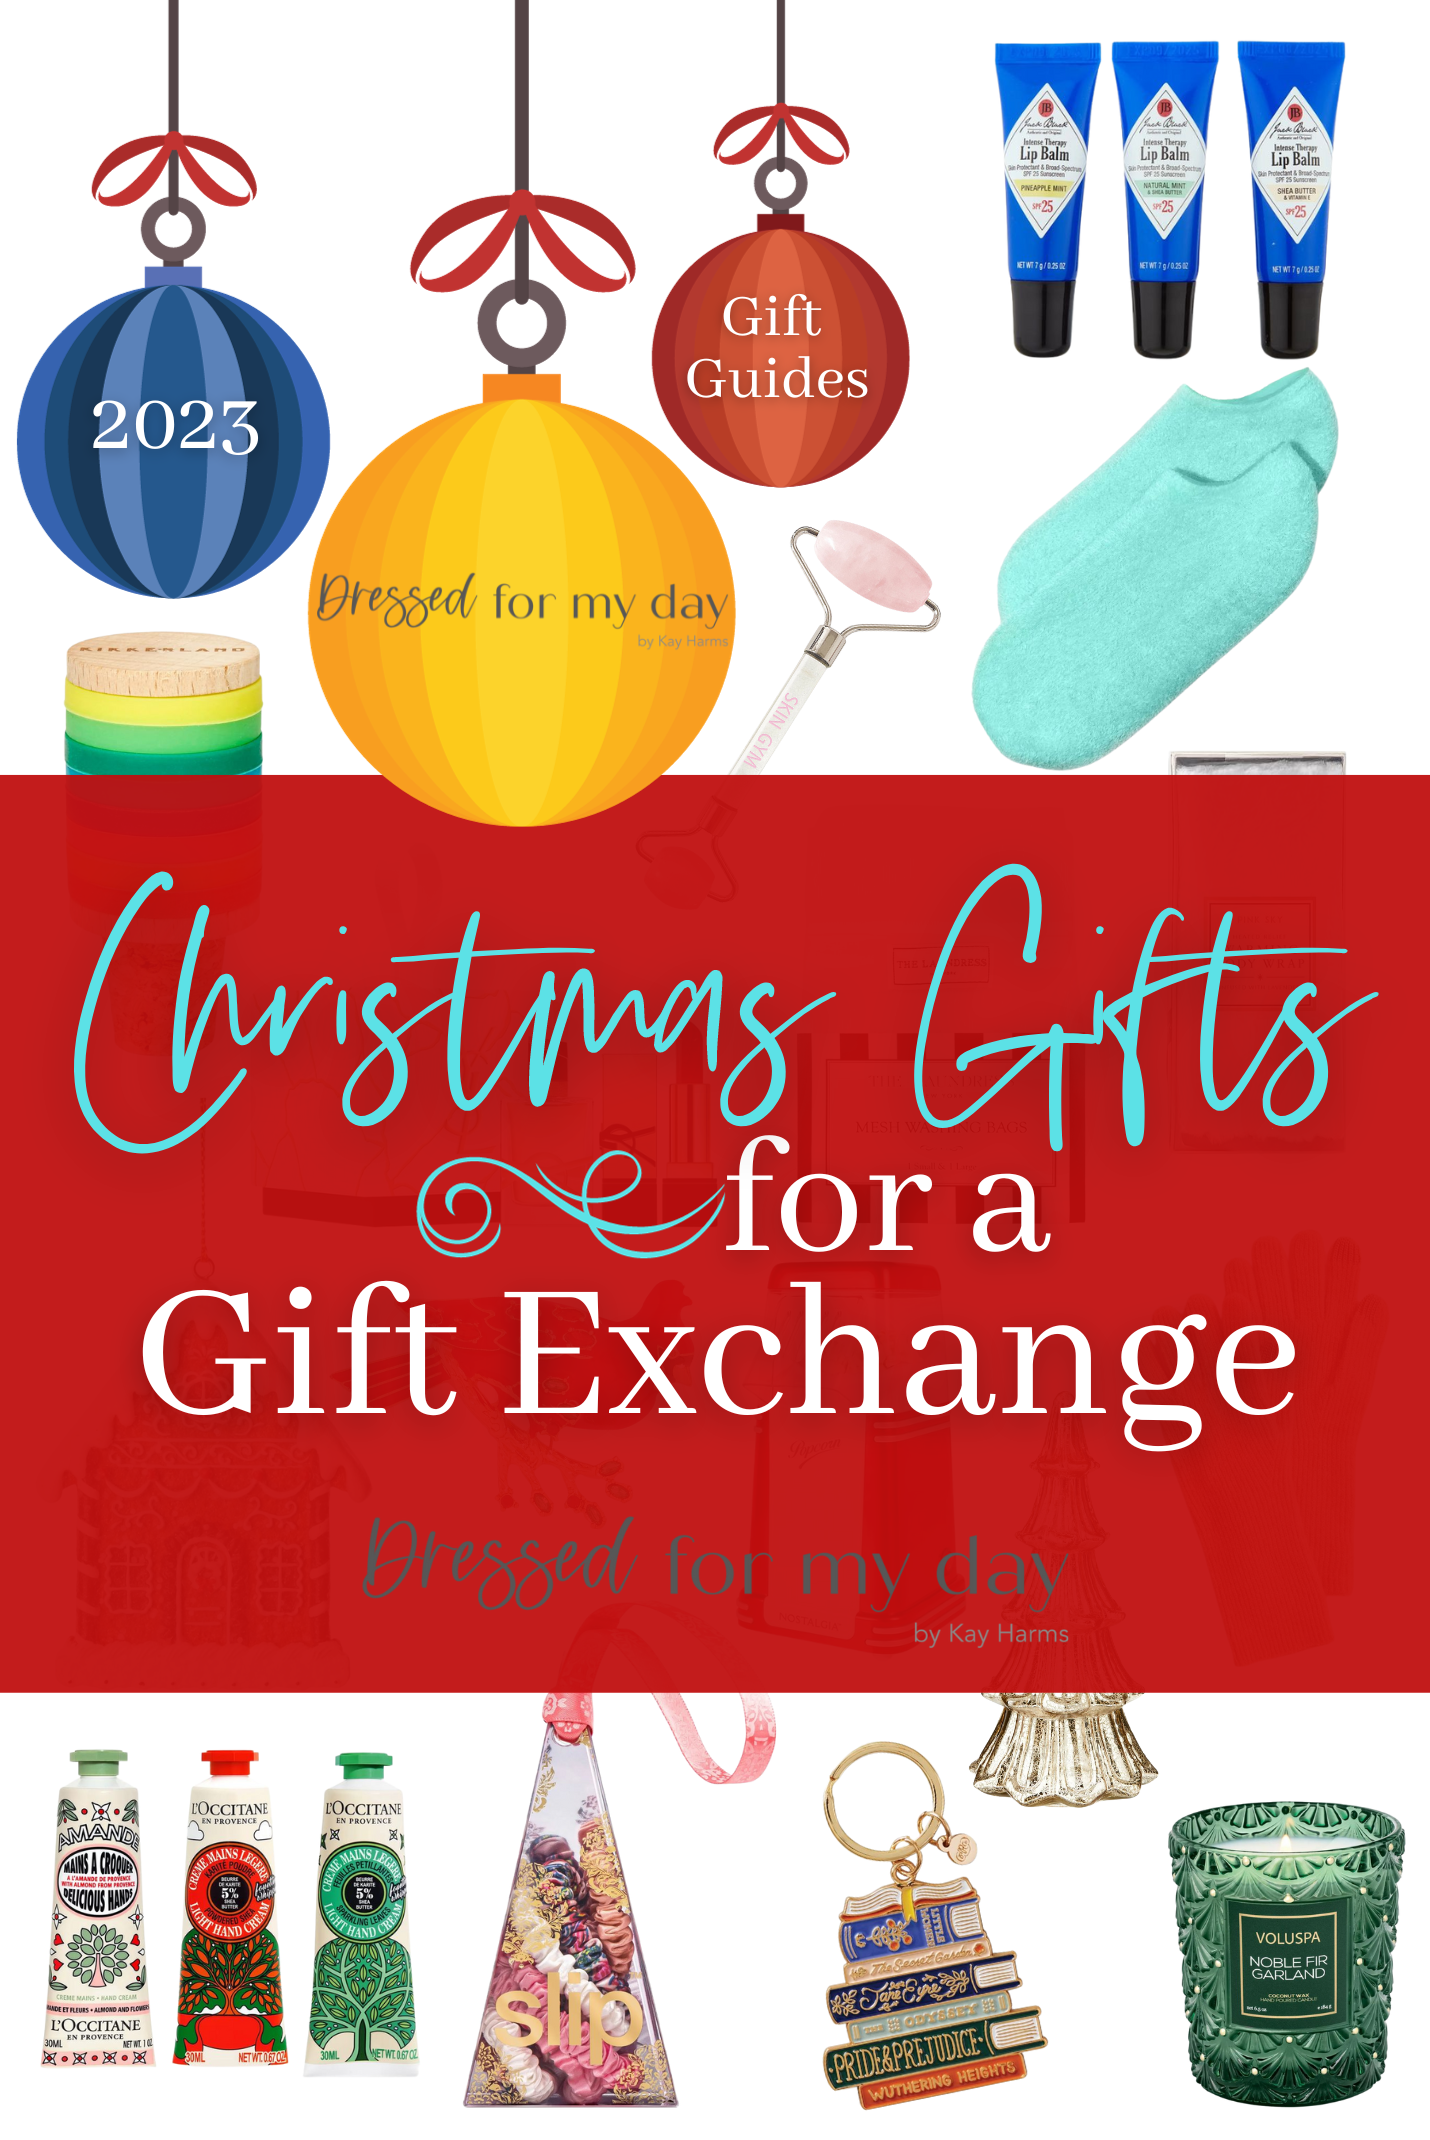 Christmas Gift Exchange Game | Yankee Swap | White Elephant Gift Exchange  Cards | Holiday Present Swap Fun | Stay at Home Family Party Game